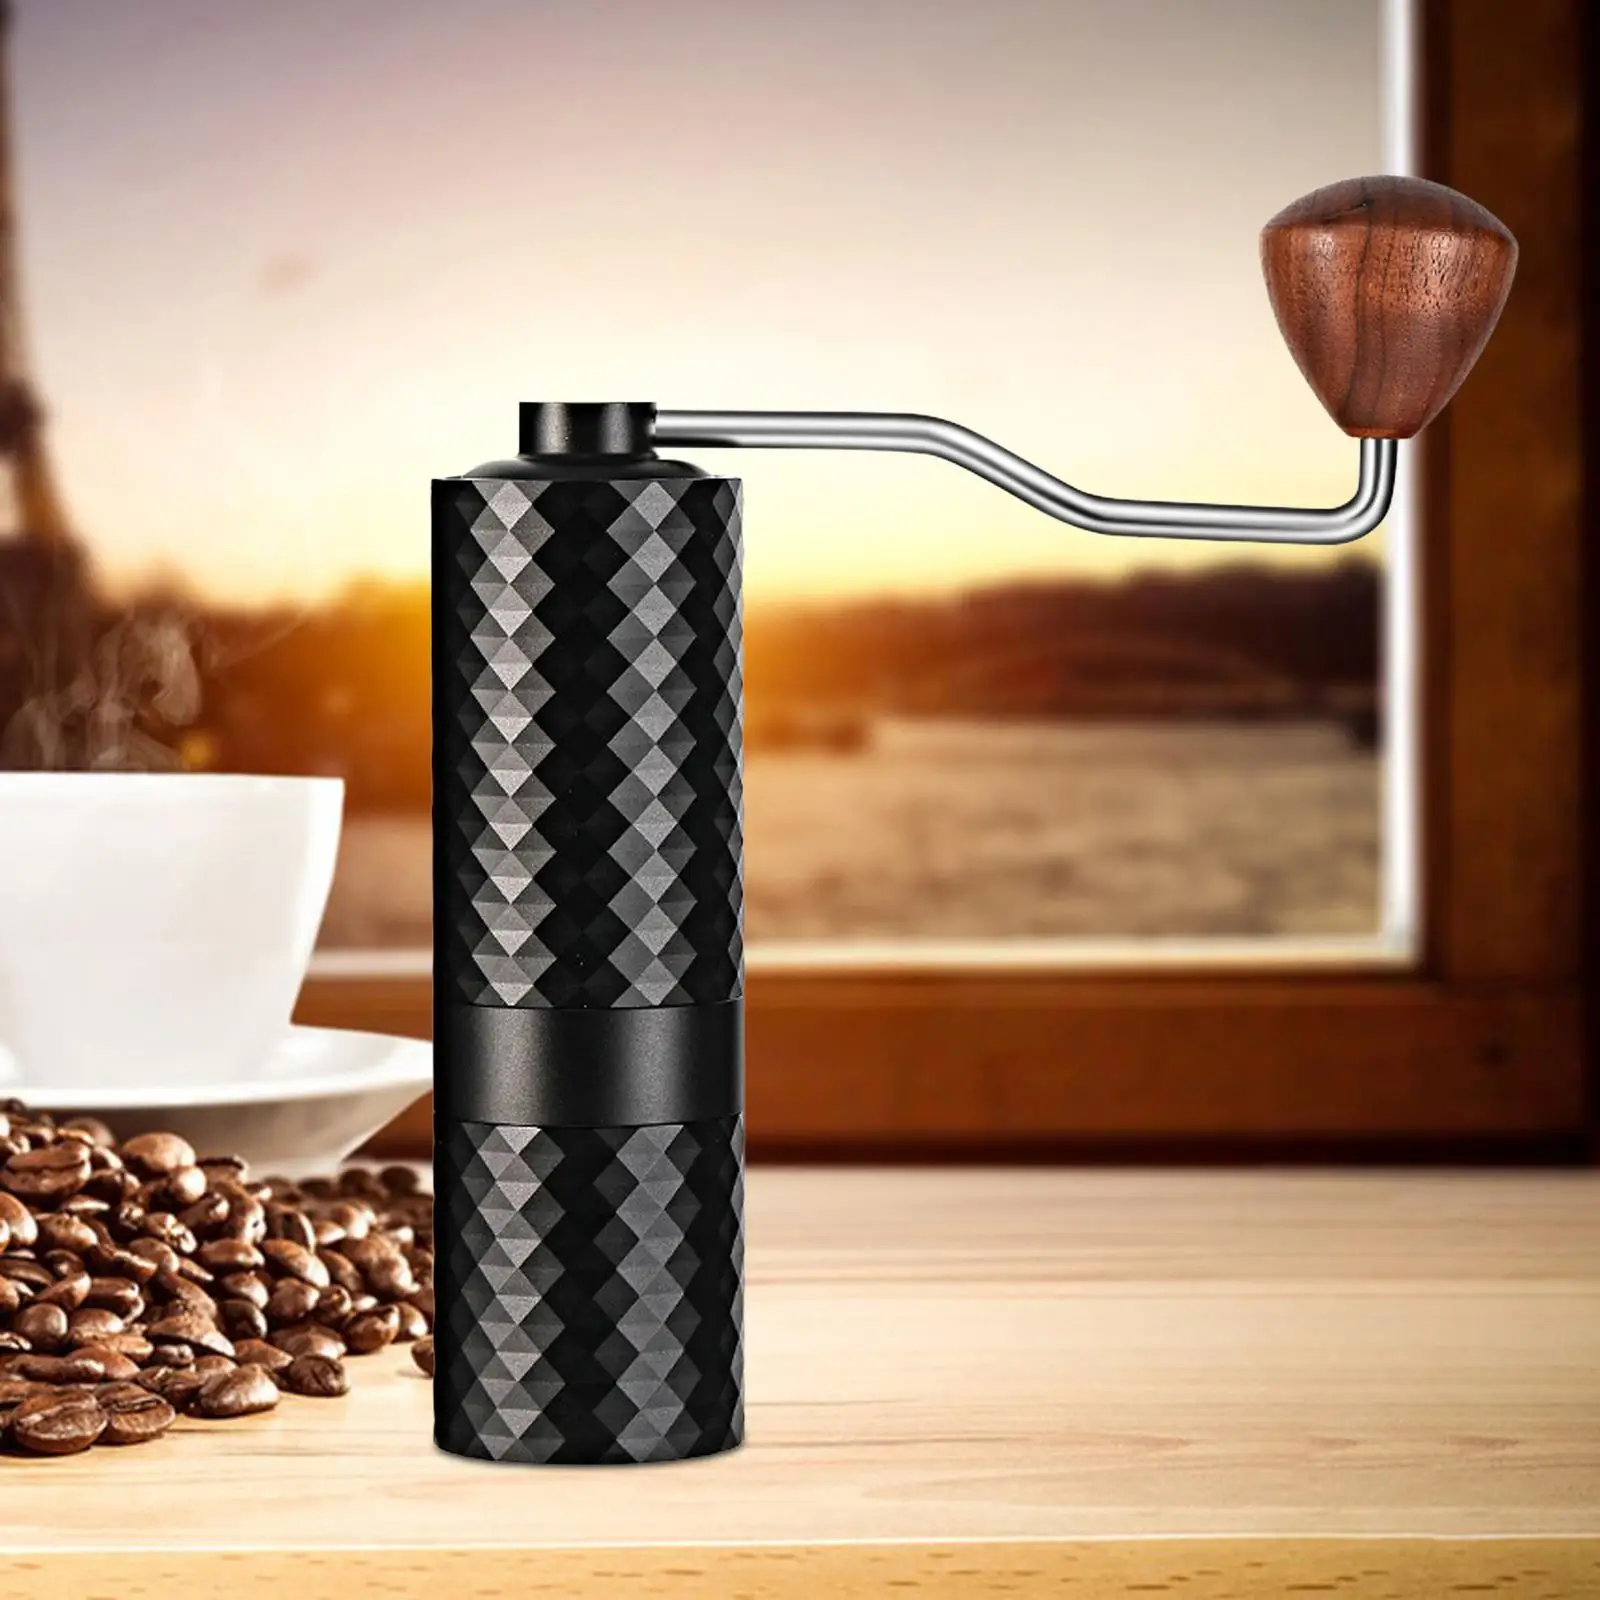 Professional Manual Grinder Conical Burr Mill Handheld Coffee Beans Mill Manual Coffee Grinder for Picnic Office Holiday Gifts